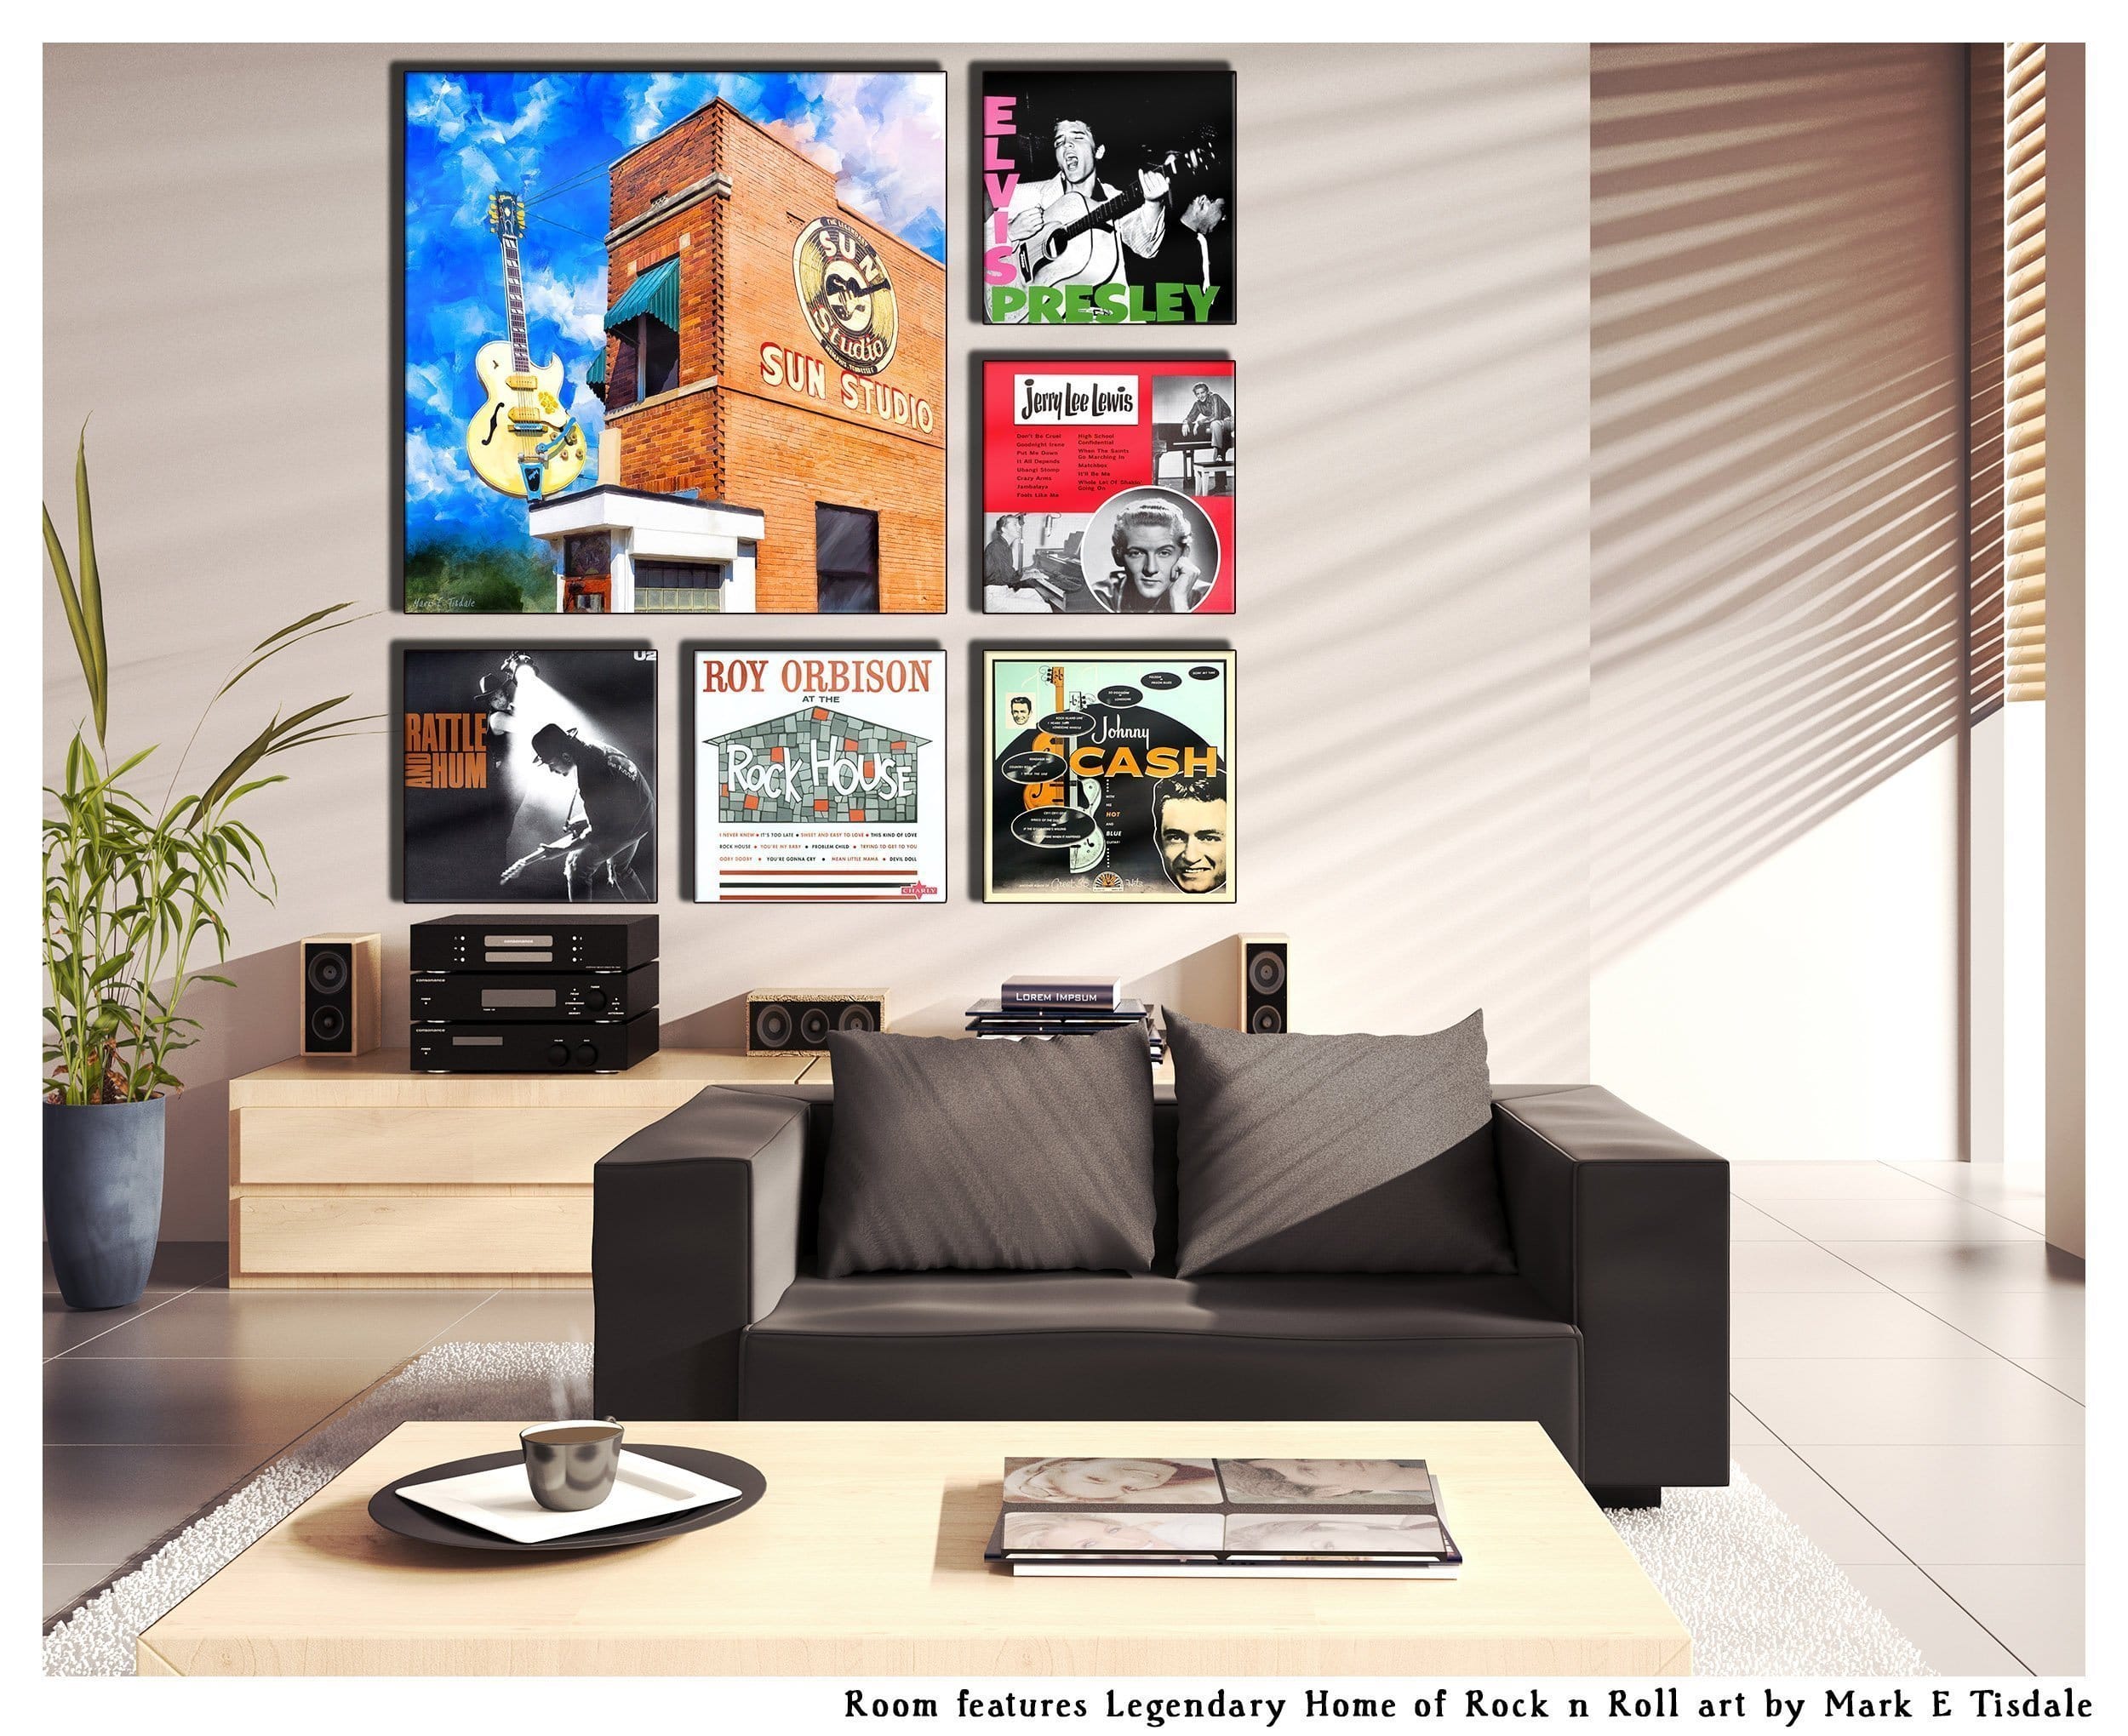 Album Cover Wall Art Display Ideas Grouping With Art Mark On Art But do you know how to make your album cover design more attractive? album cover wall art display ideas